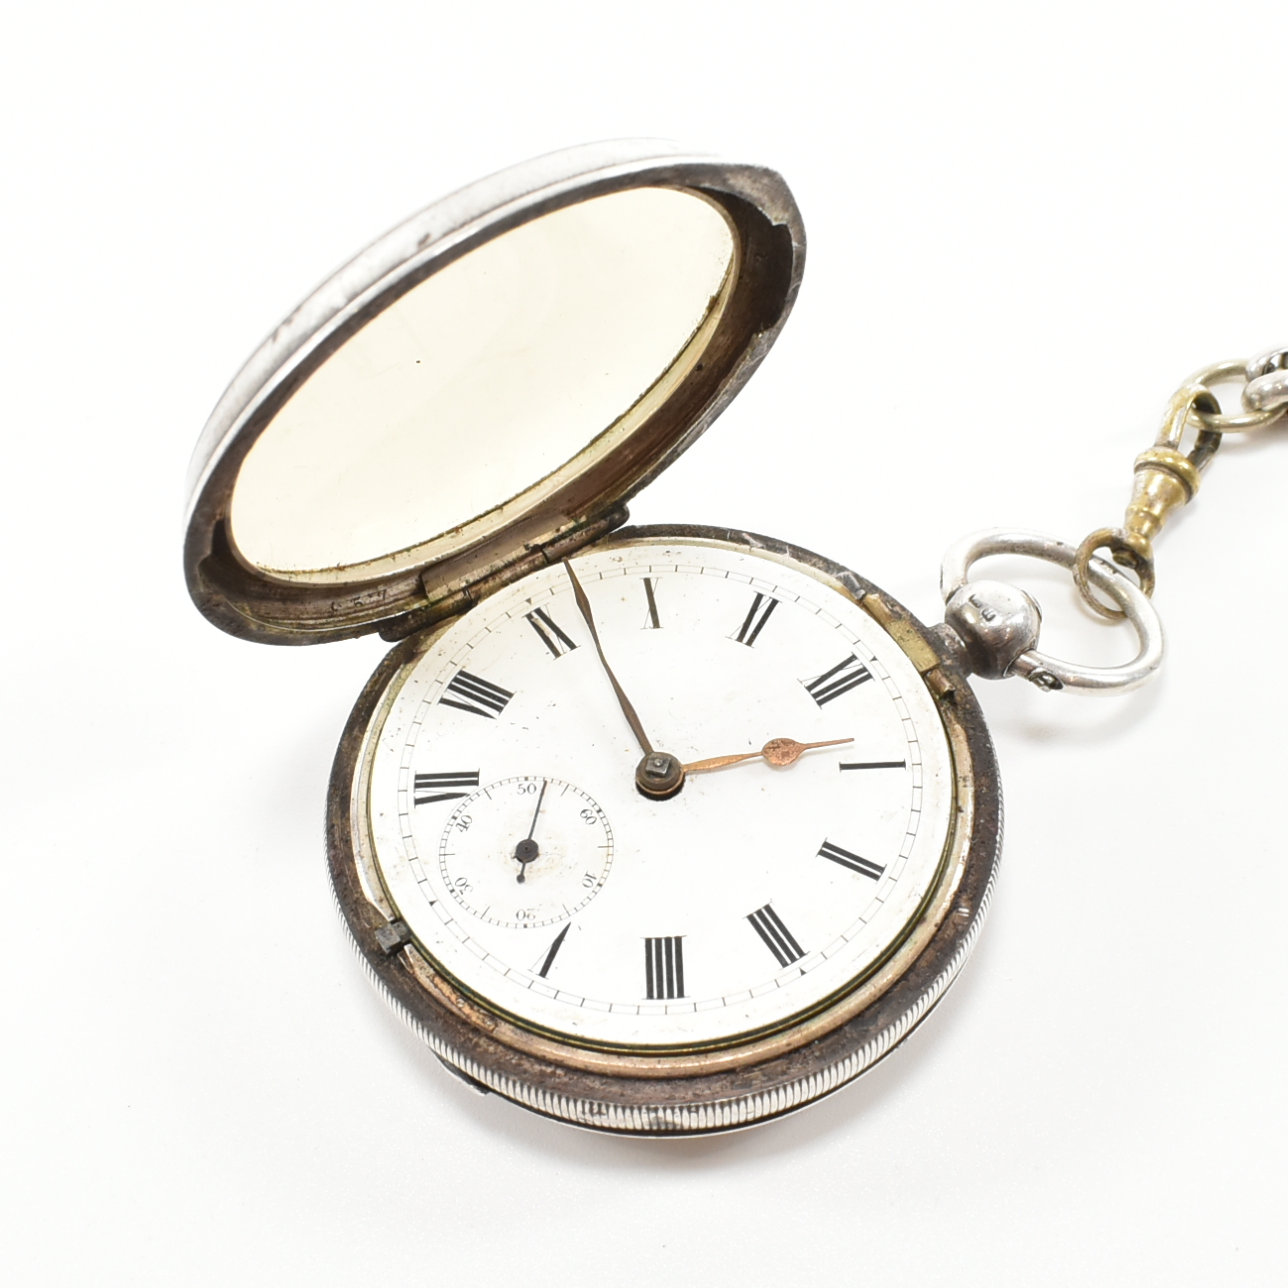 EARLY 20TH CENTURY 1901 HALLMARKED SILVER CASE POCKET WATCH - Image 5 of 8